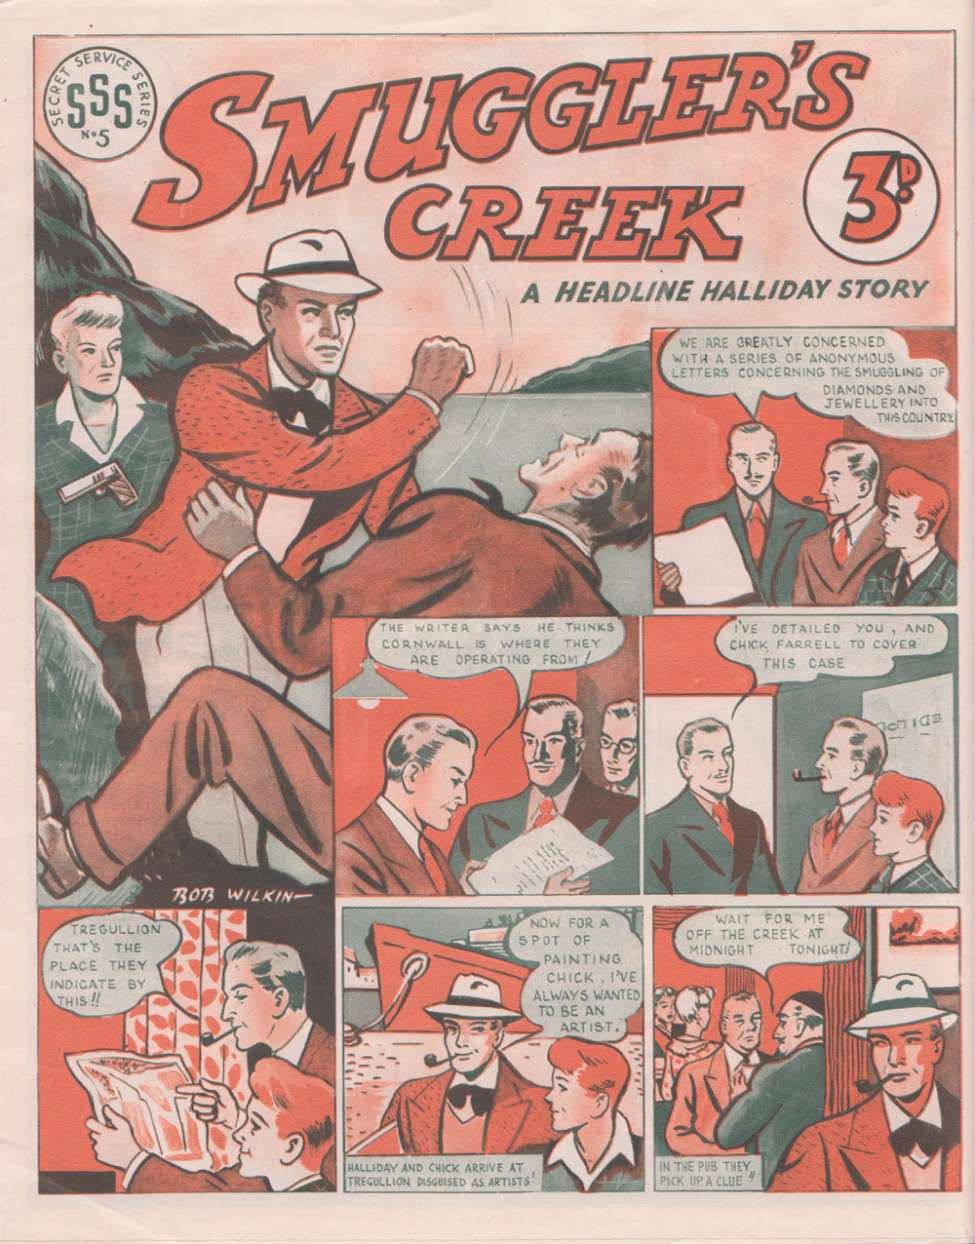 Comic Book Cover For Secret Service Series 5 - Smugglers Creek